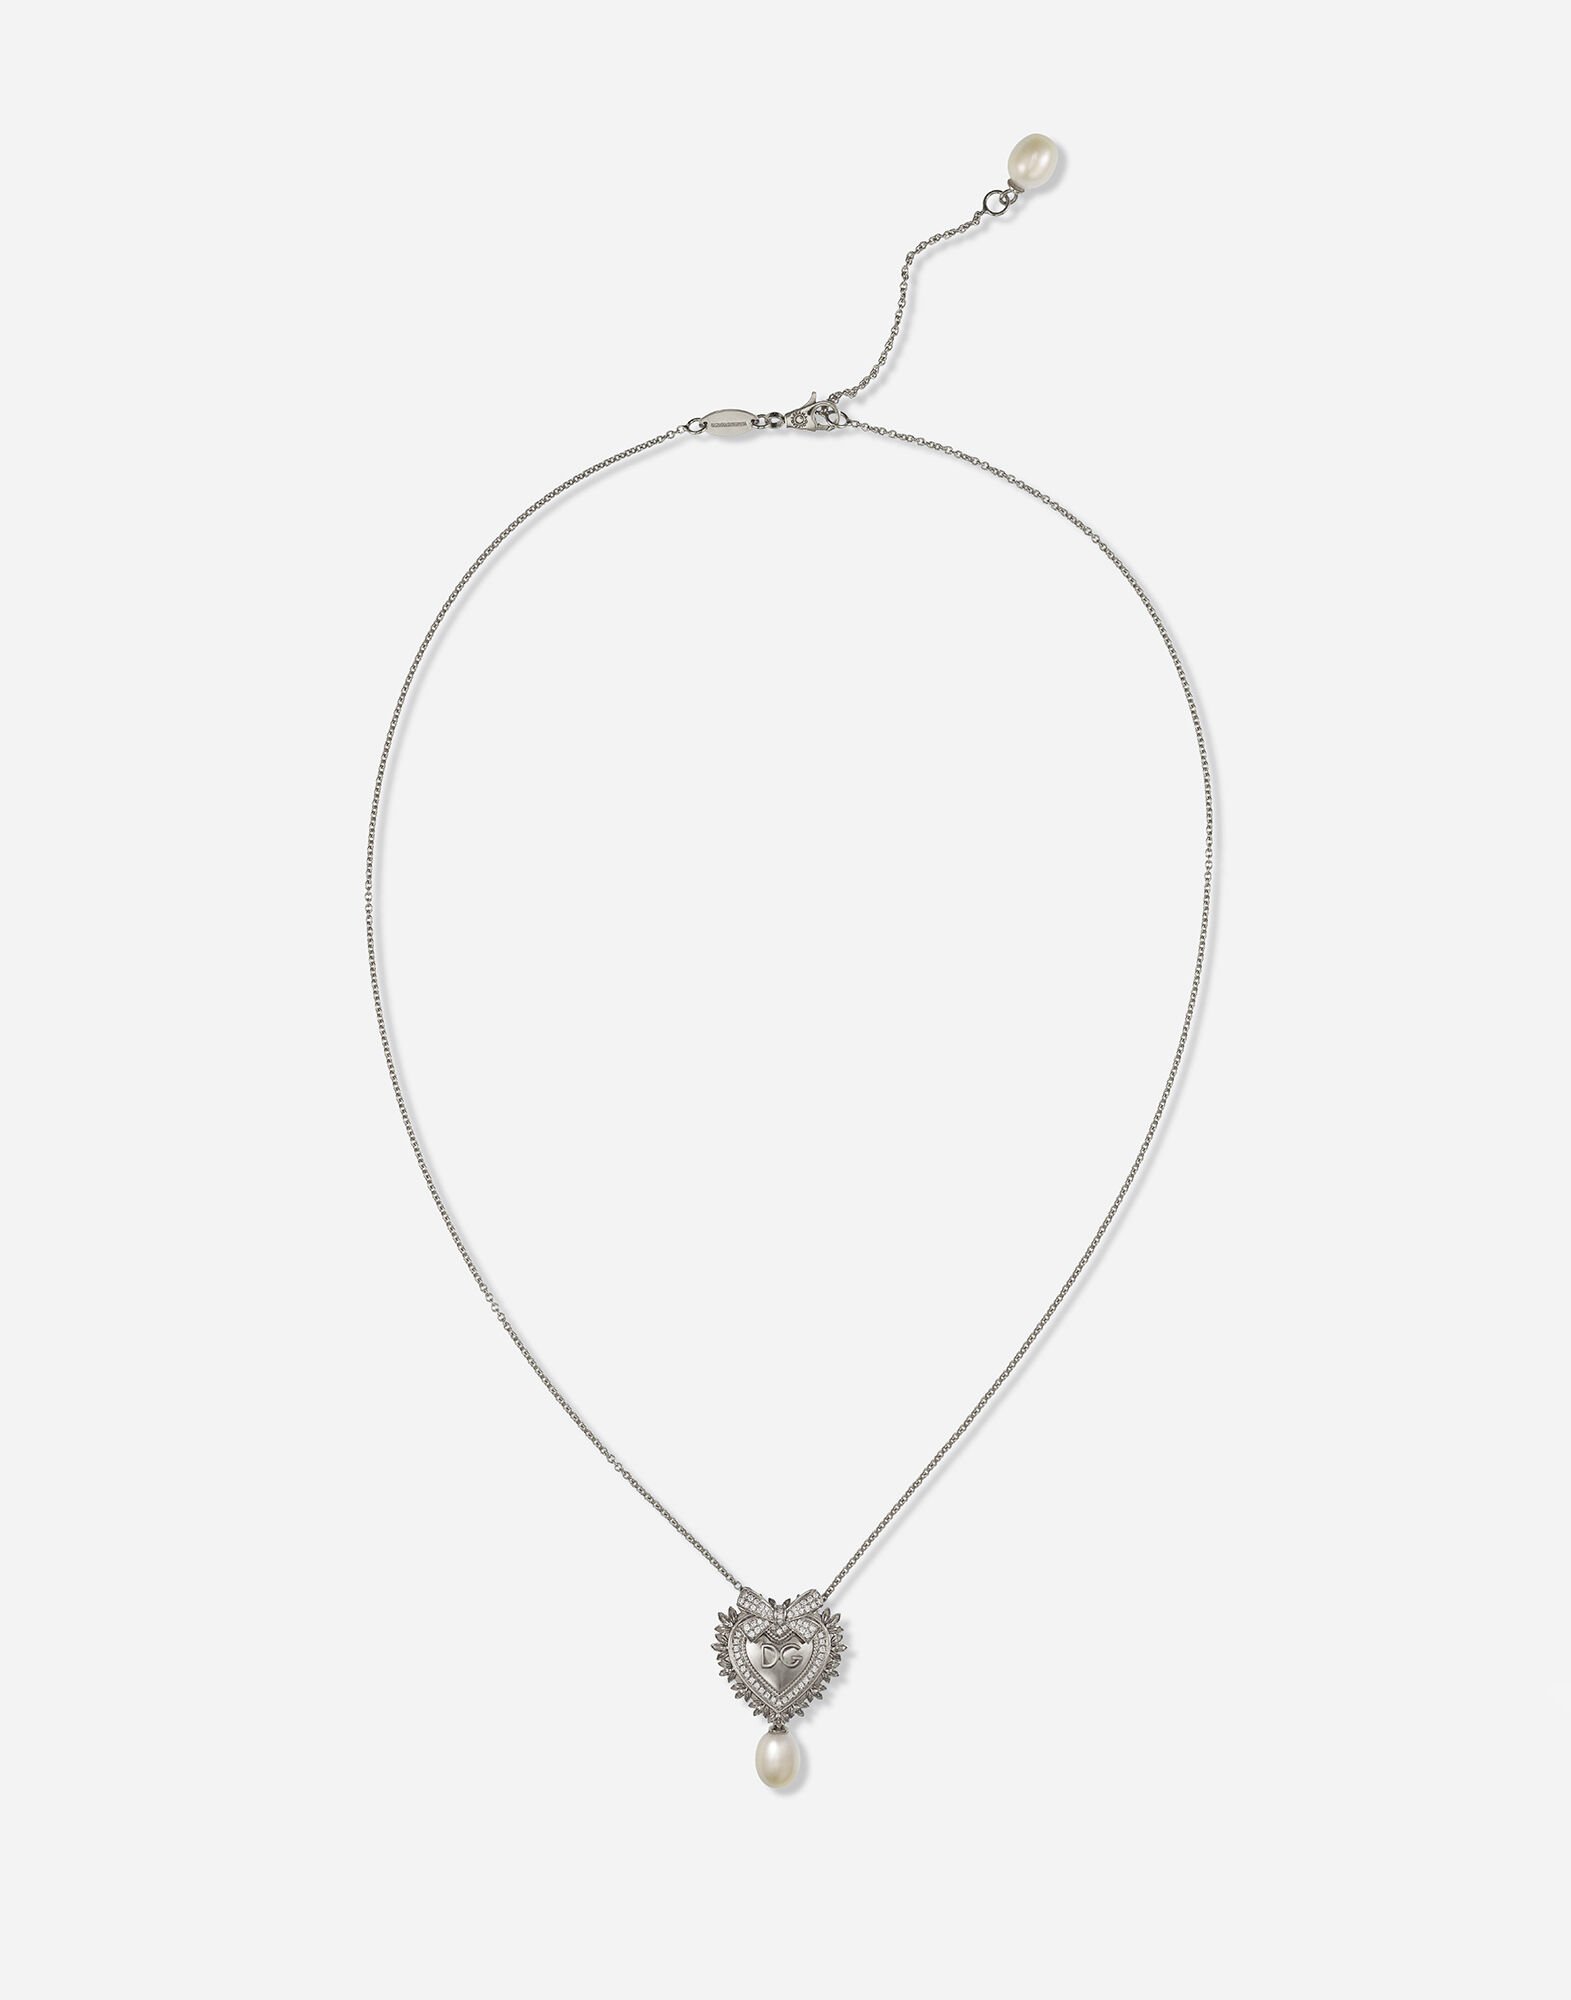 Dolce & Gabbana Devotion necklace in white gold with diamonds and pearls Yellow Gold WRLD1GWDWYE